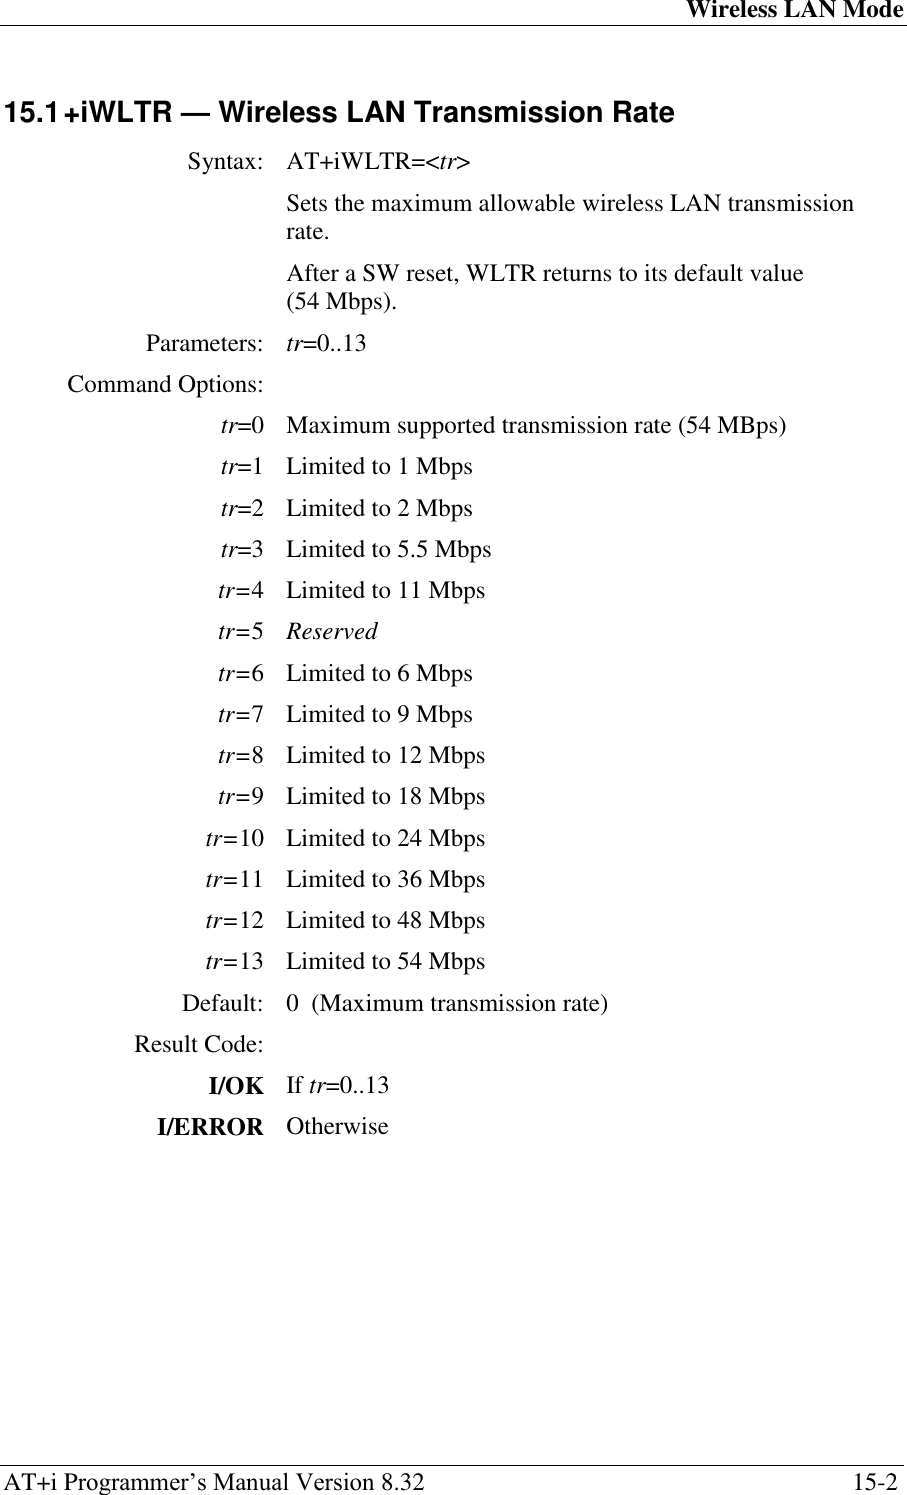 Wireless LAN Mode AT+i Programmer‘s Manual Version 8.32  15-2 15.1 +iWLTR — Wireless LAN Transmission Rate  Syntax: AT+iWLTR=&lt;tr&gt;  Sets the maximum allowable wireless LAN transmission rate. After a SW reset, WLTR returns to its default value (54 Mbps). Parameters: tr=0..13 Command Options:  tr=0 Maximum supported transmission rate (54 MBps) tr=1 Limited to 1 Mbps tr=2 Limited to 2 Mbps tr=3 Limited to 5.5 Mbps tr=4 Limited to 11 Mbps tr=5 Reserved tr=6 Limited to 6 Mbps tr=7 Limited to 9 Mbps tr=8 Limited to 12 Mbps tr=9 Limited to 18 Mbps tr=10 Limited to 24 Mbps tr=11 Limited to 36 Mbps tr=12 Limited to 48 Mbps tr=13 Limited to 54 Mbps Default: 0  (Maximum transmission rate) Result Code:  I/OK If tr=0..13 I/ERROR Otherwise 